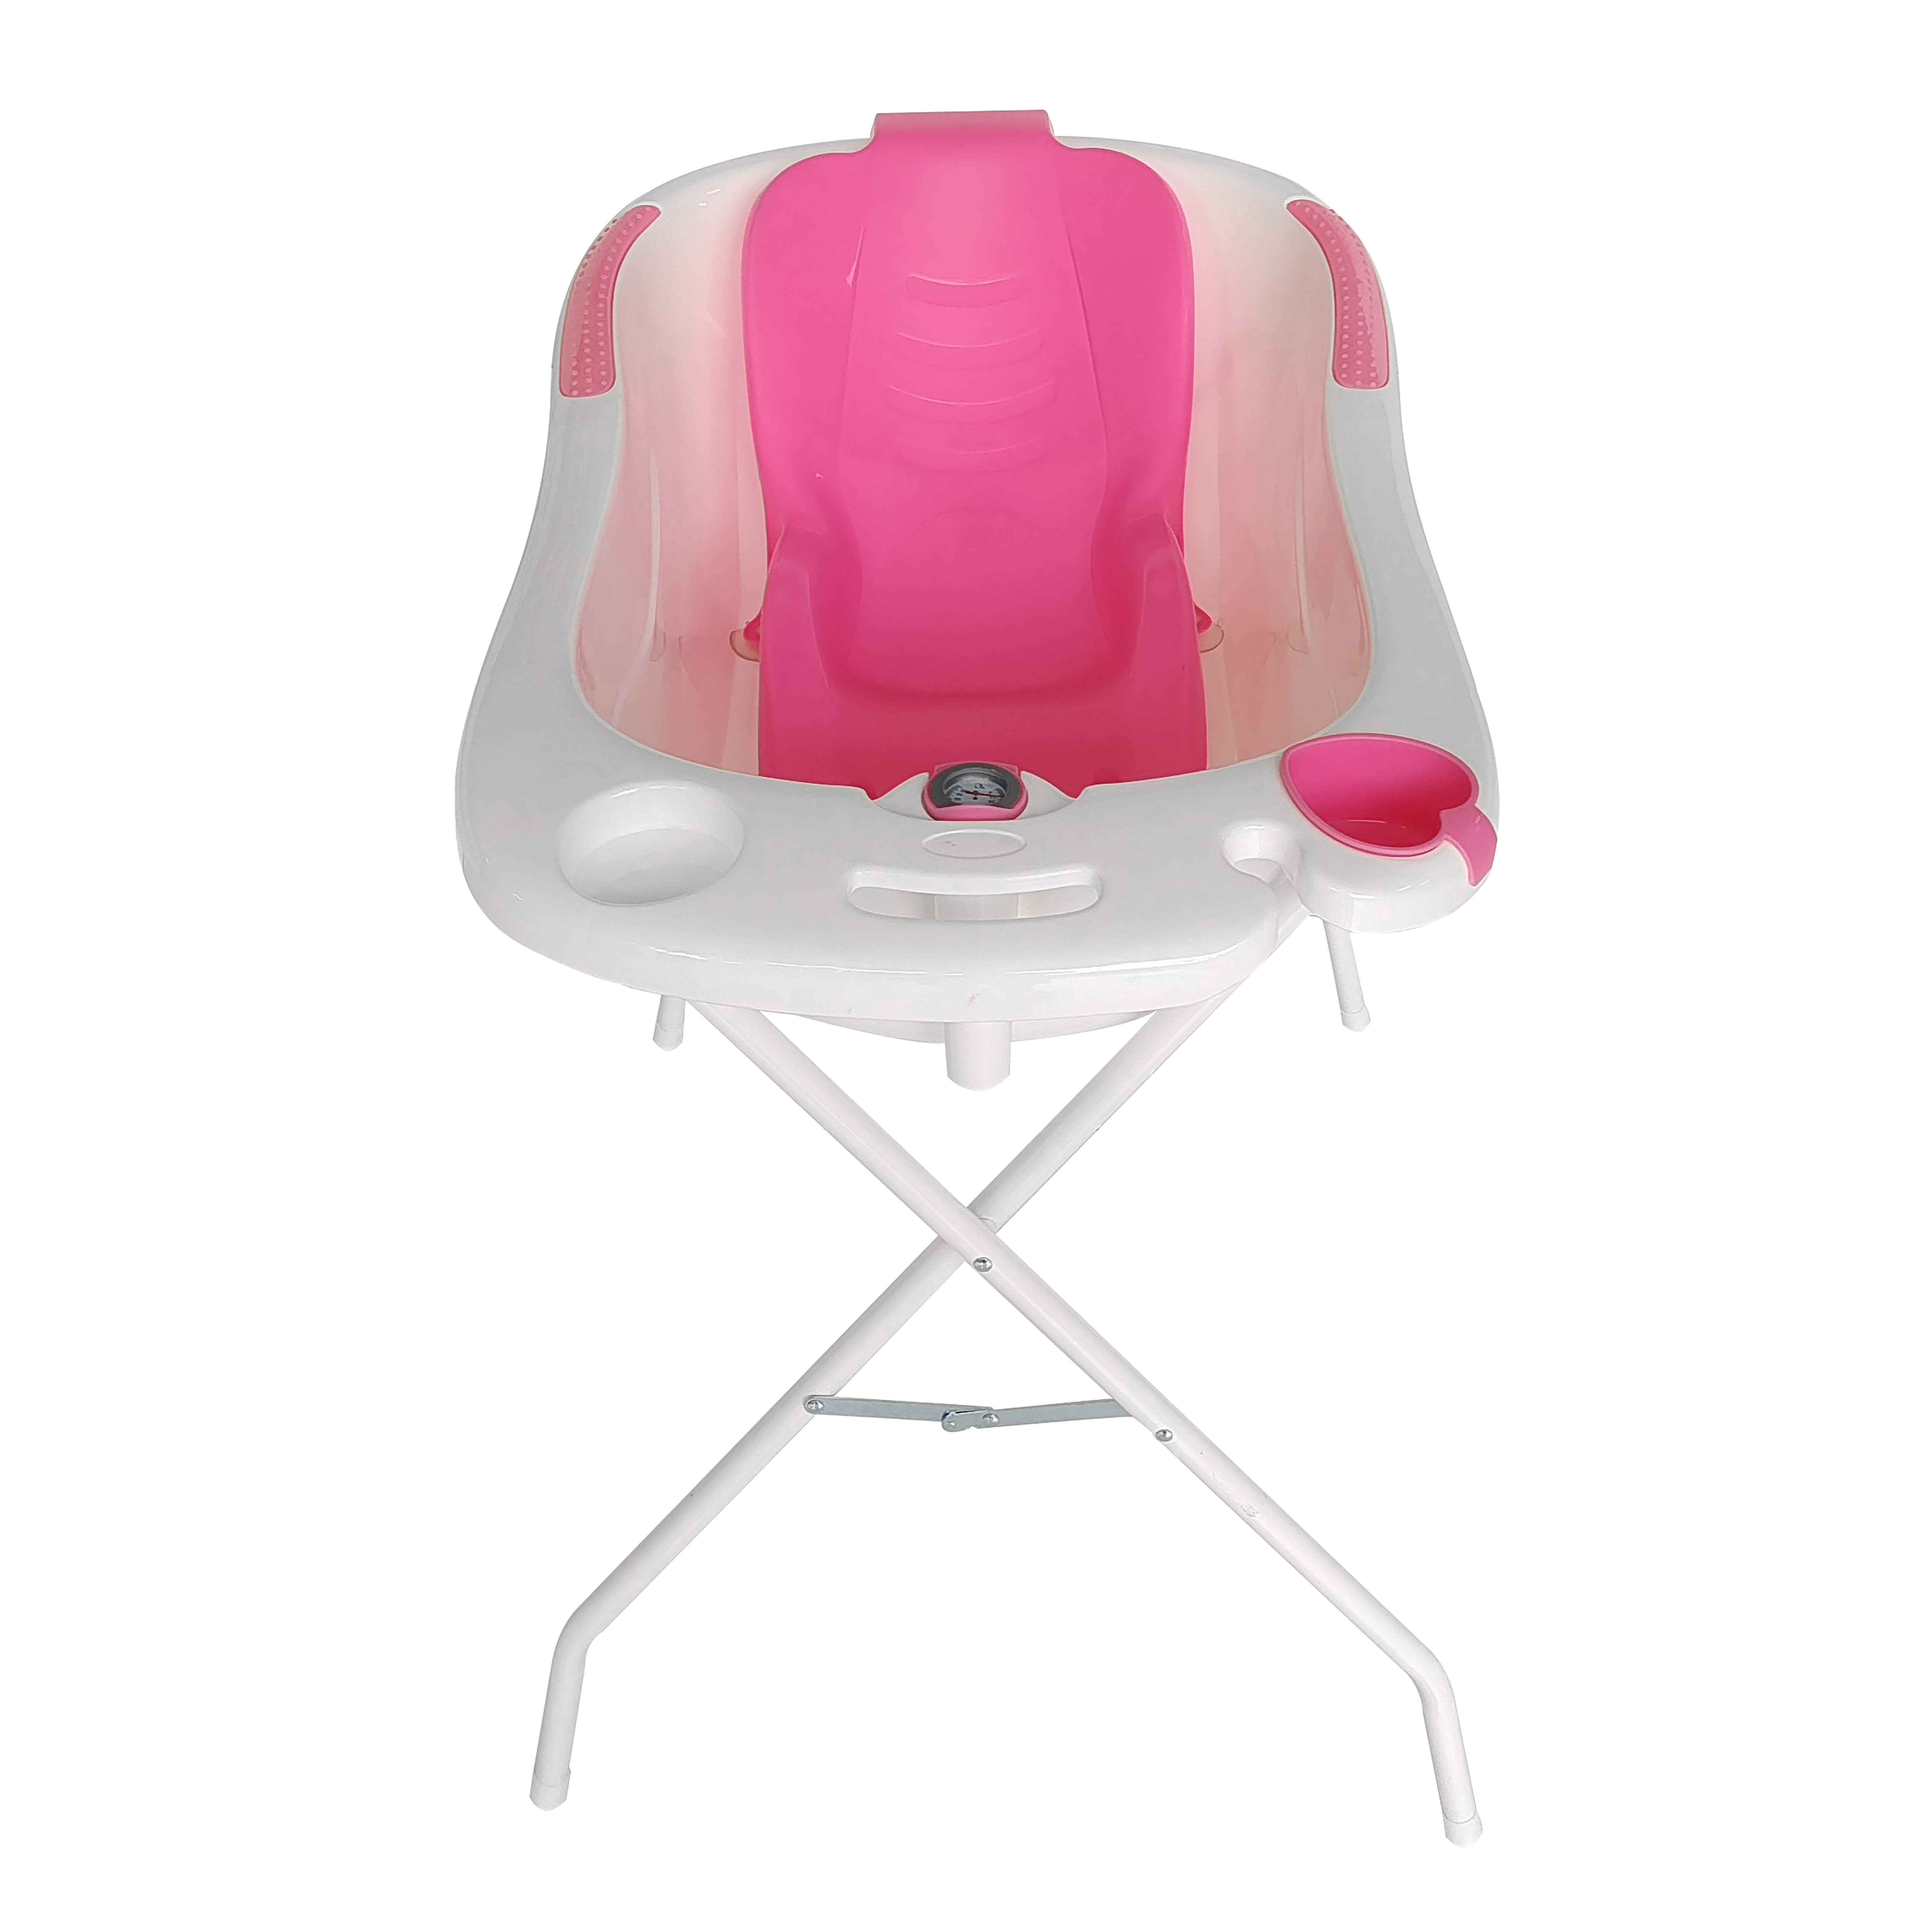 Lucky Baby Bobee Bath Tub W/Thermometer + Stand (Pink)